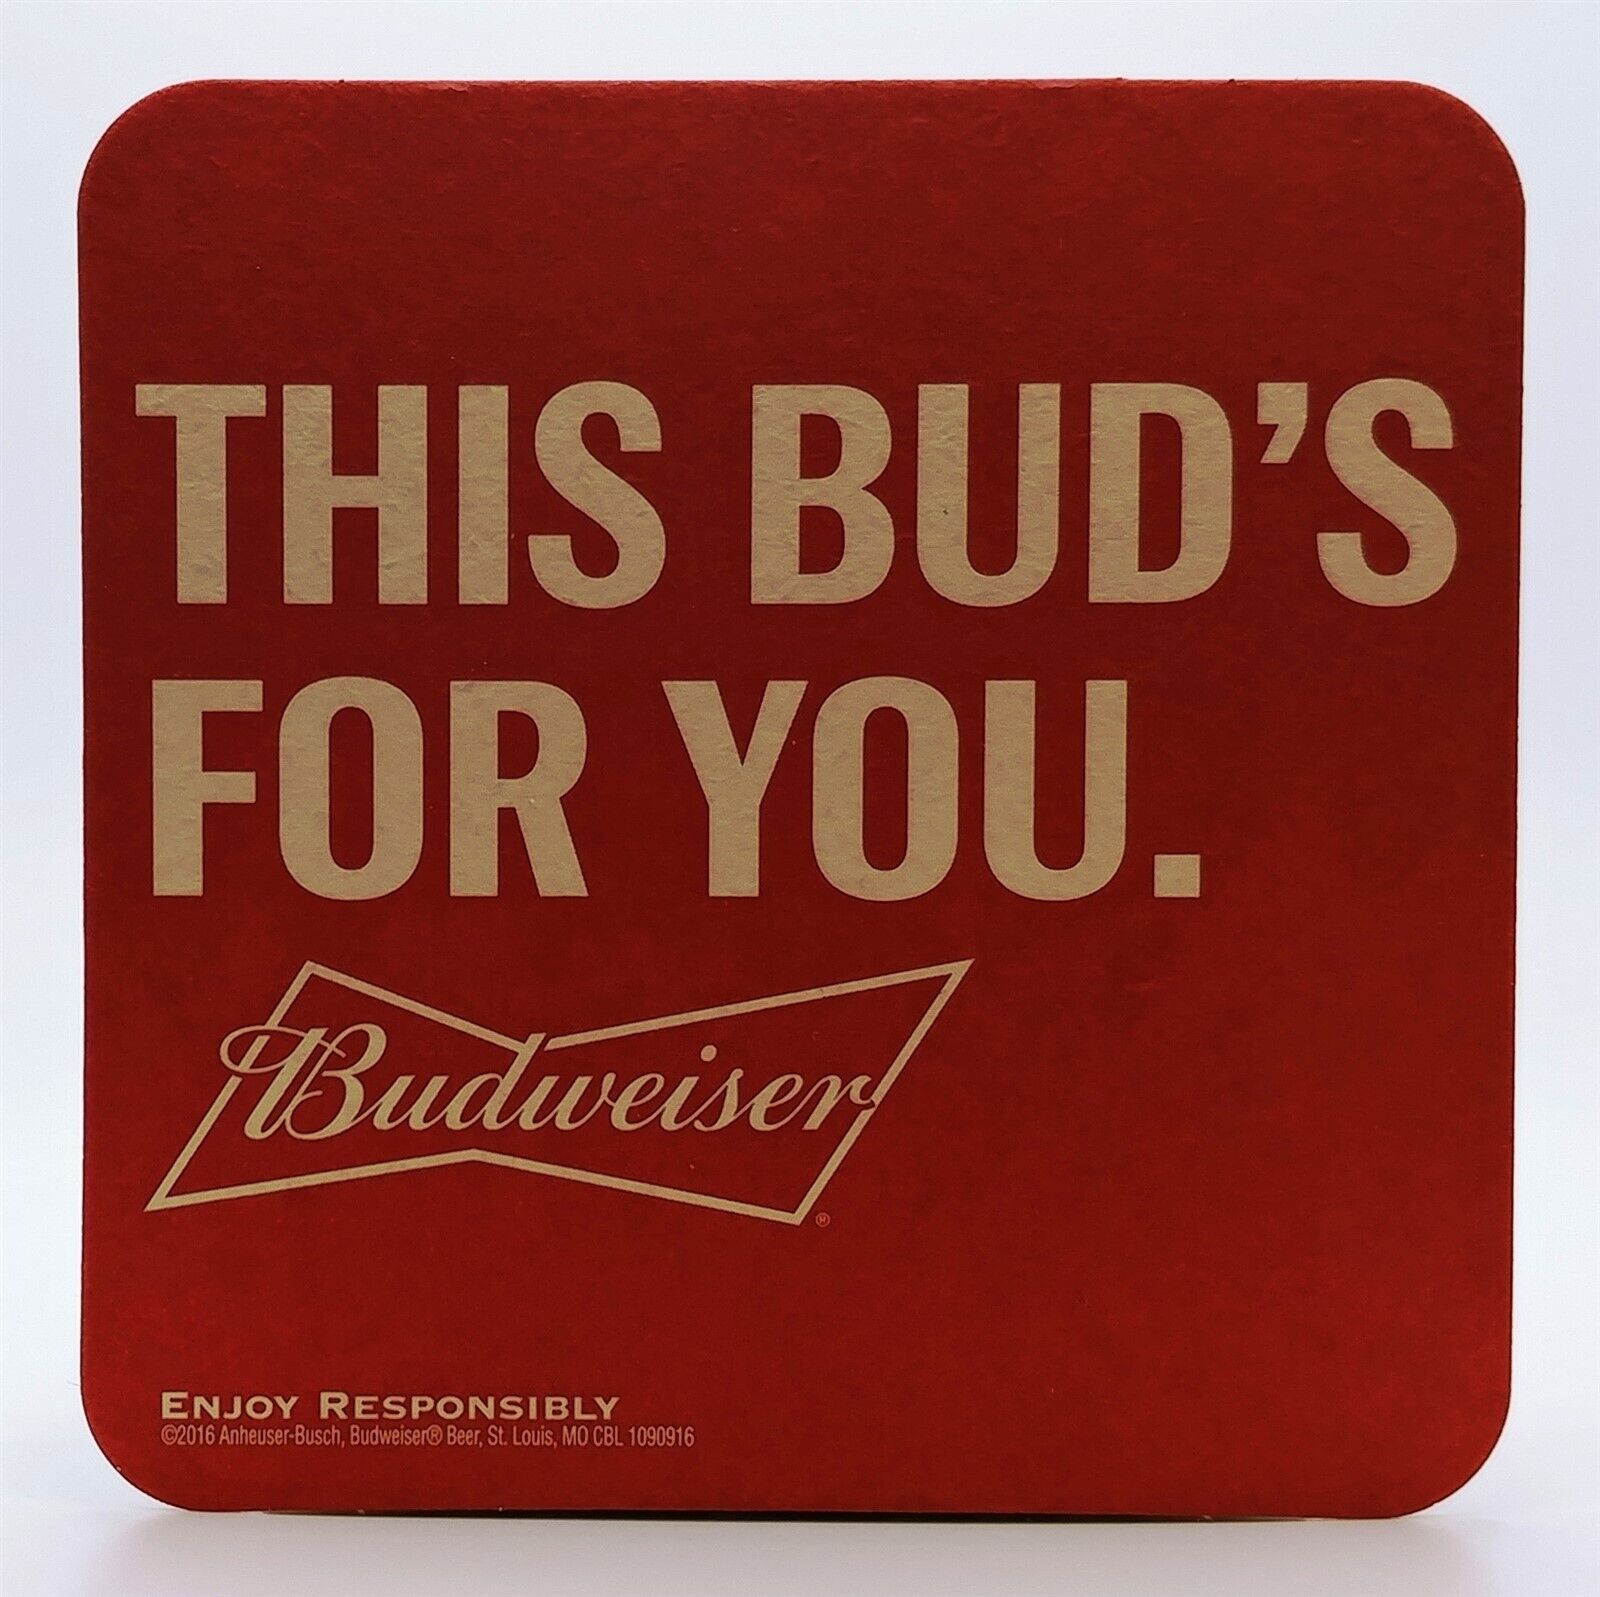 2016 Anheuser Busch Budweiser This Bud\'s For You Beer Coaster-S4039